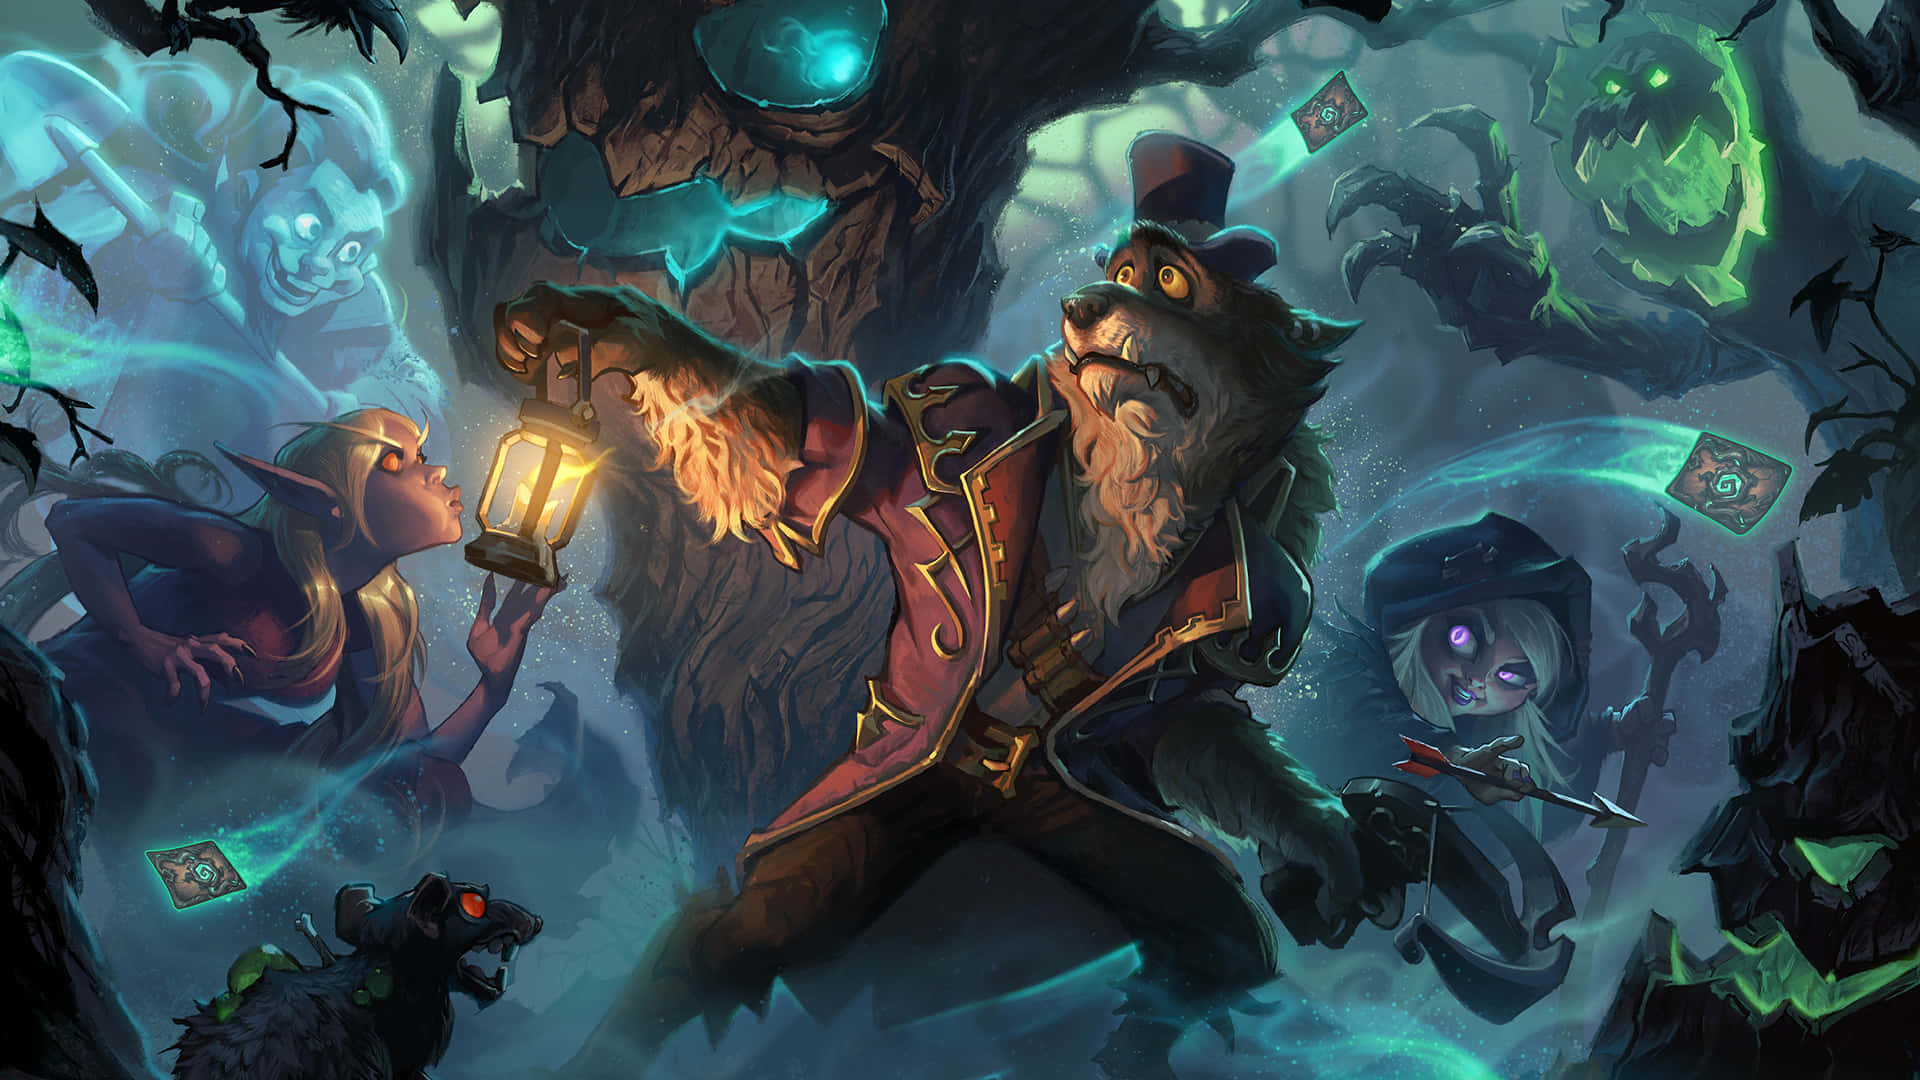 A Priest takes on a Shaman in the World of Warcraft Trading Card Game - Hearthstone